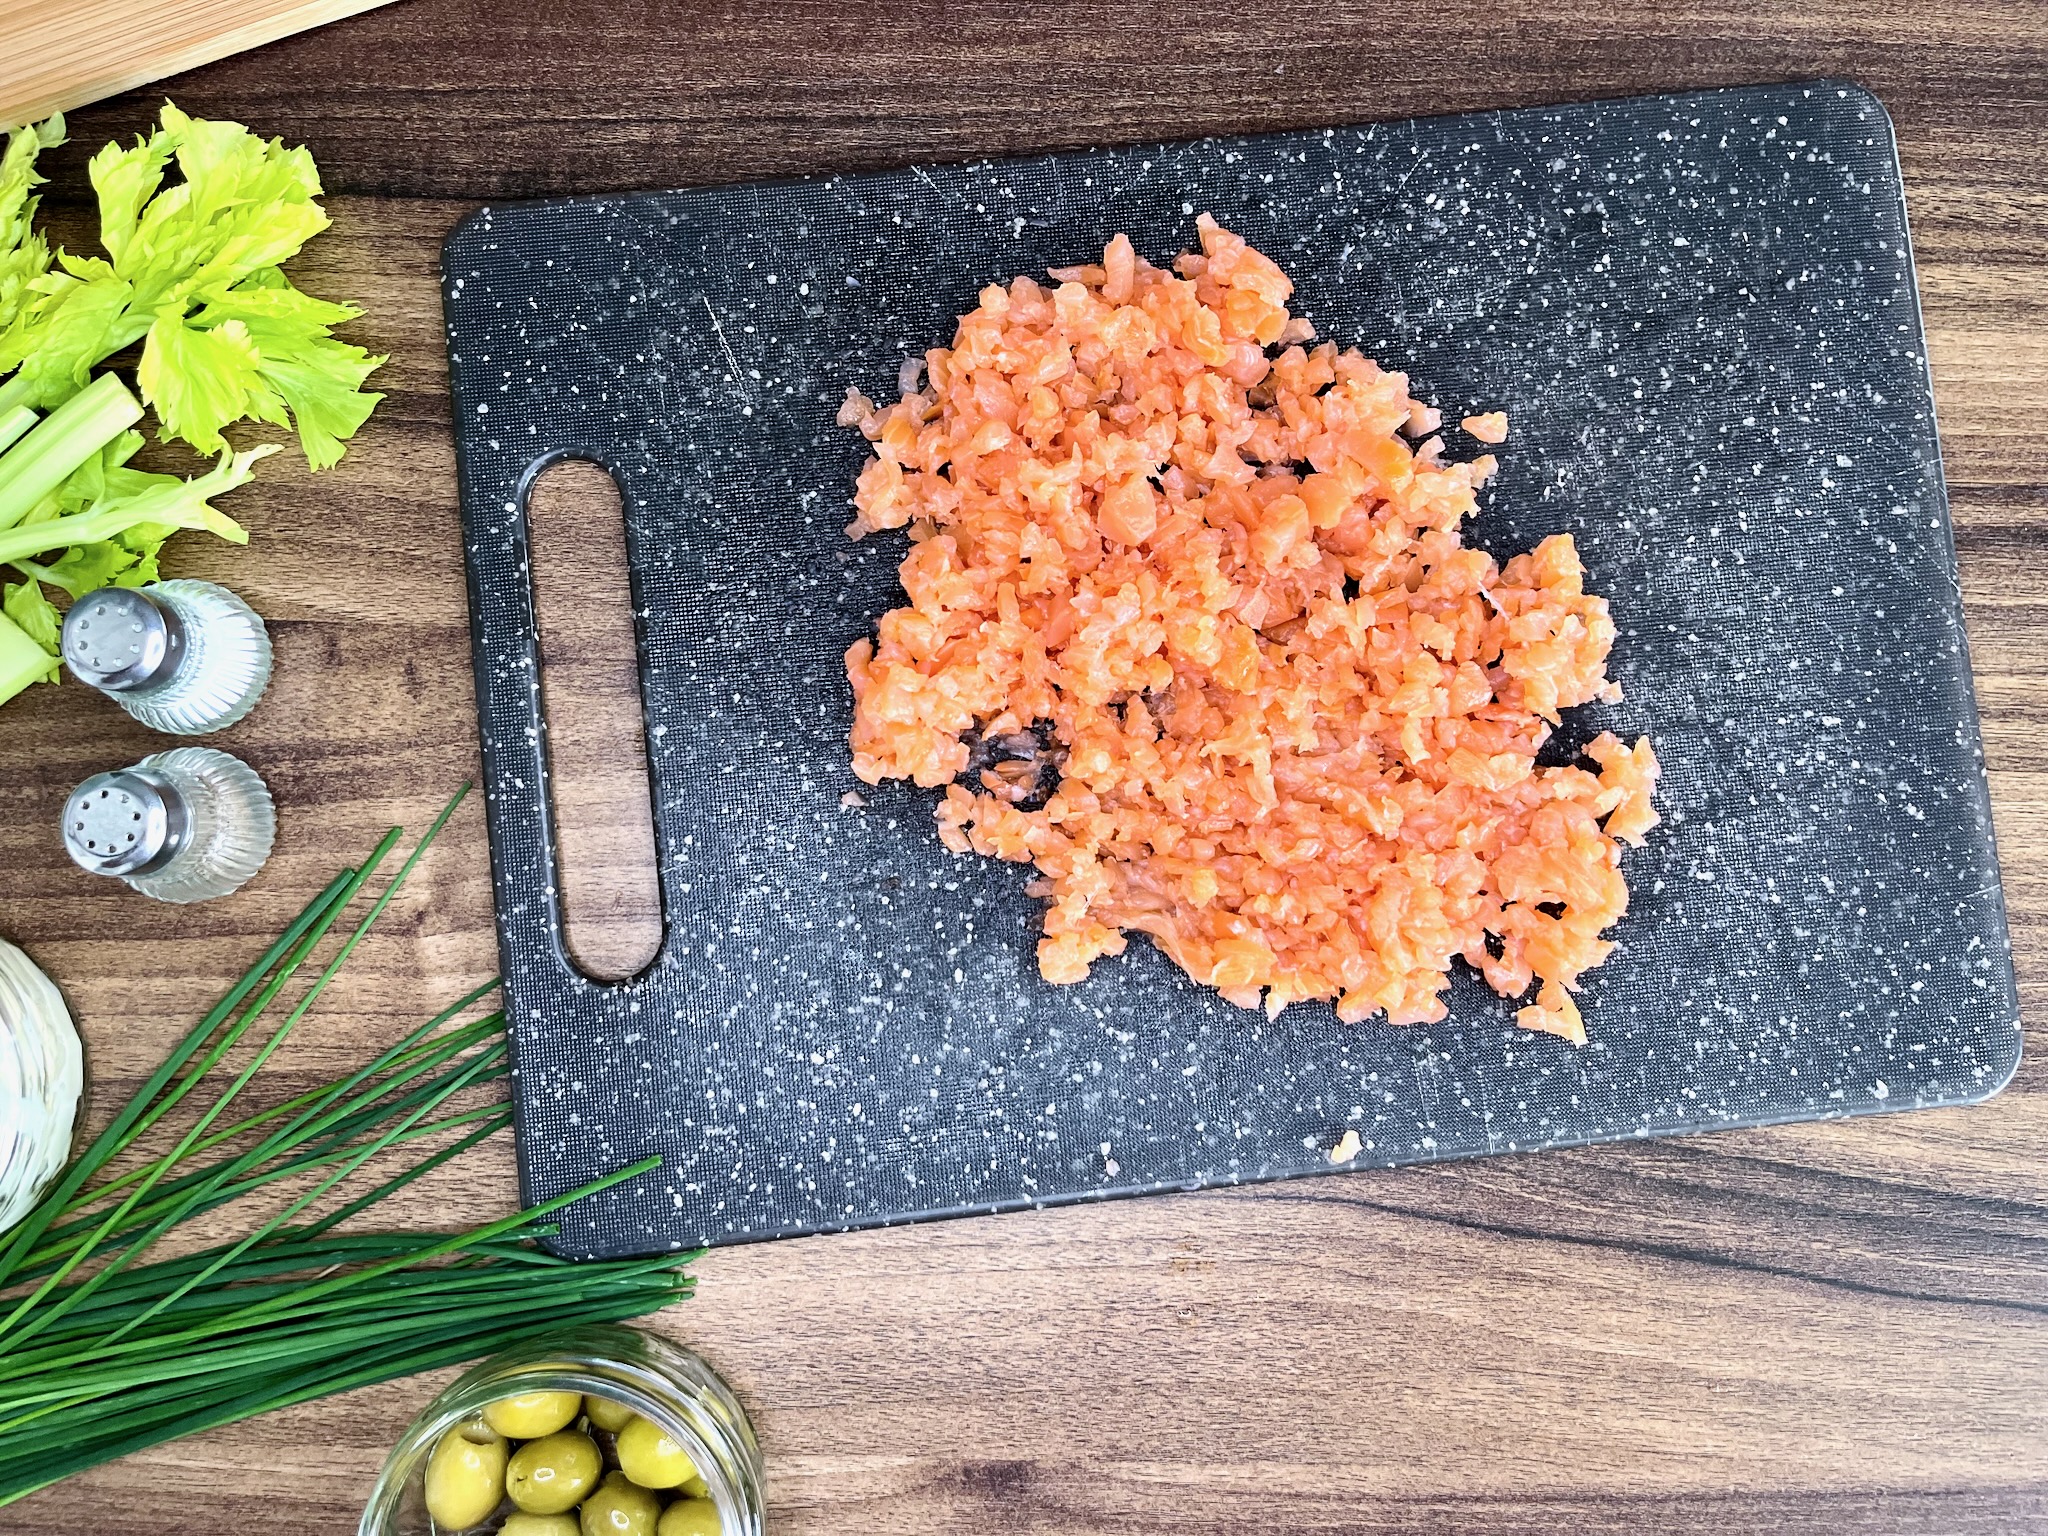 Smoked salmon, finely chopped, rests on a chopping board.